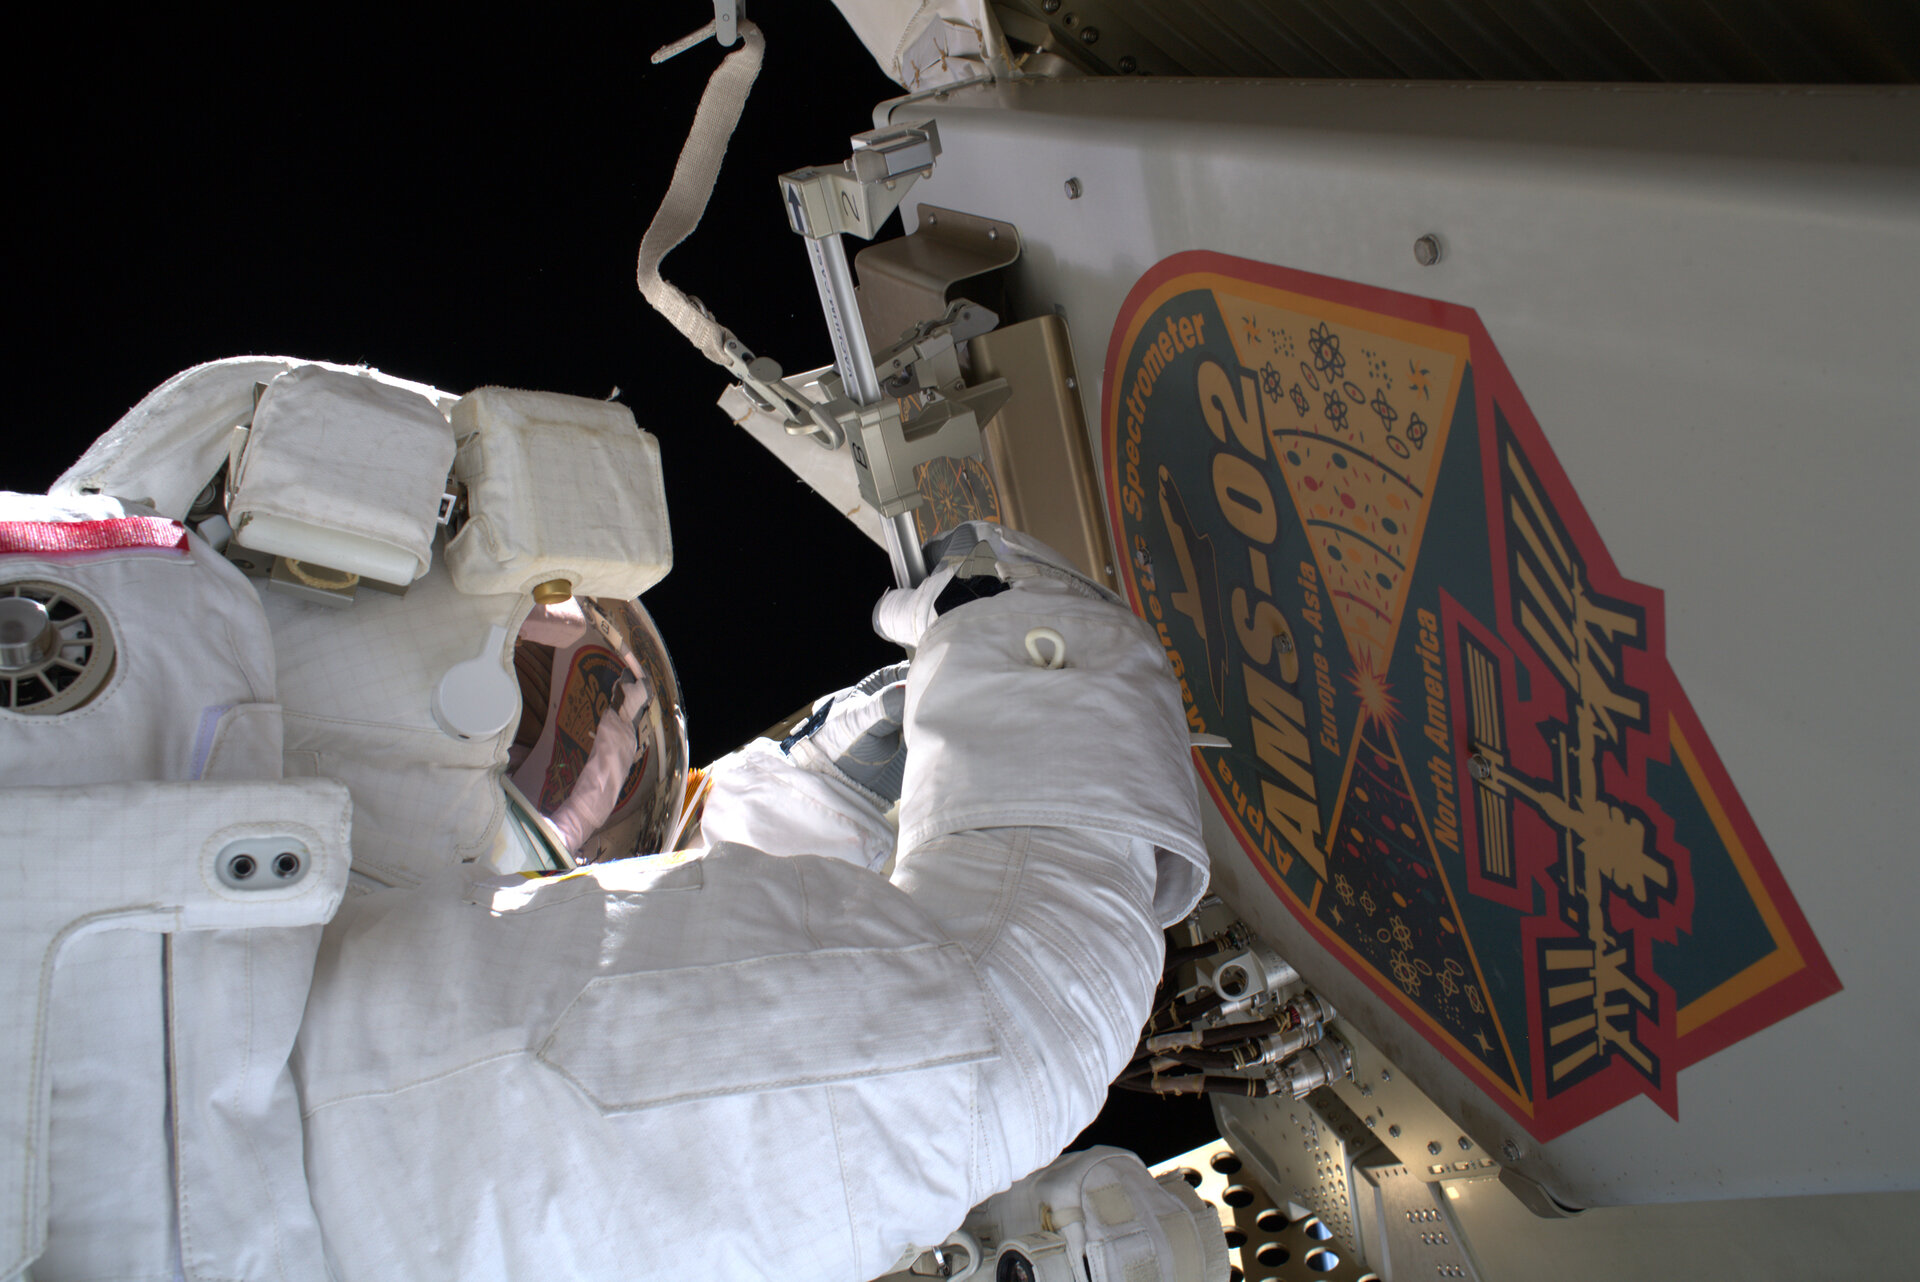 Luca removes the debris shield from AMS-02